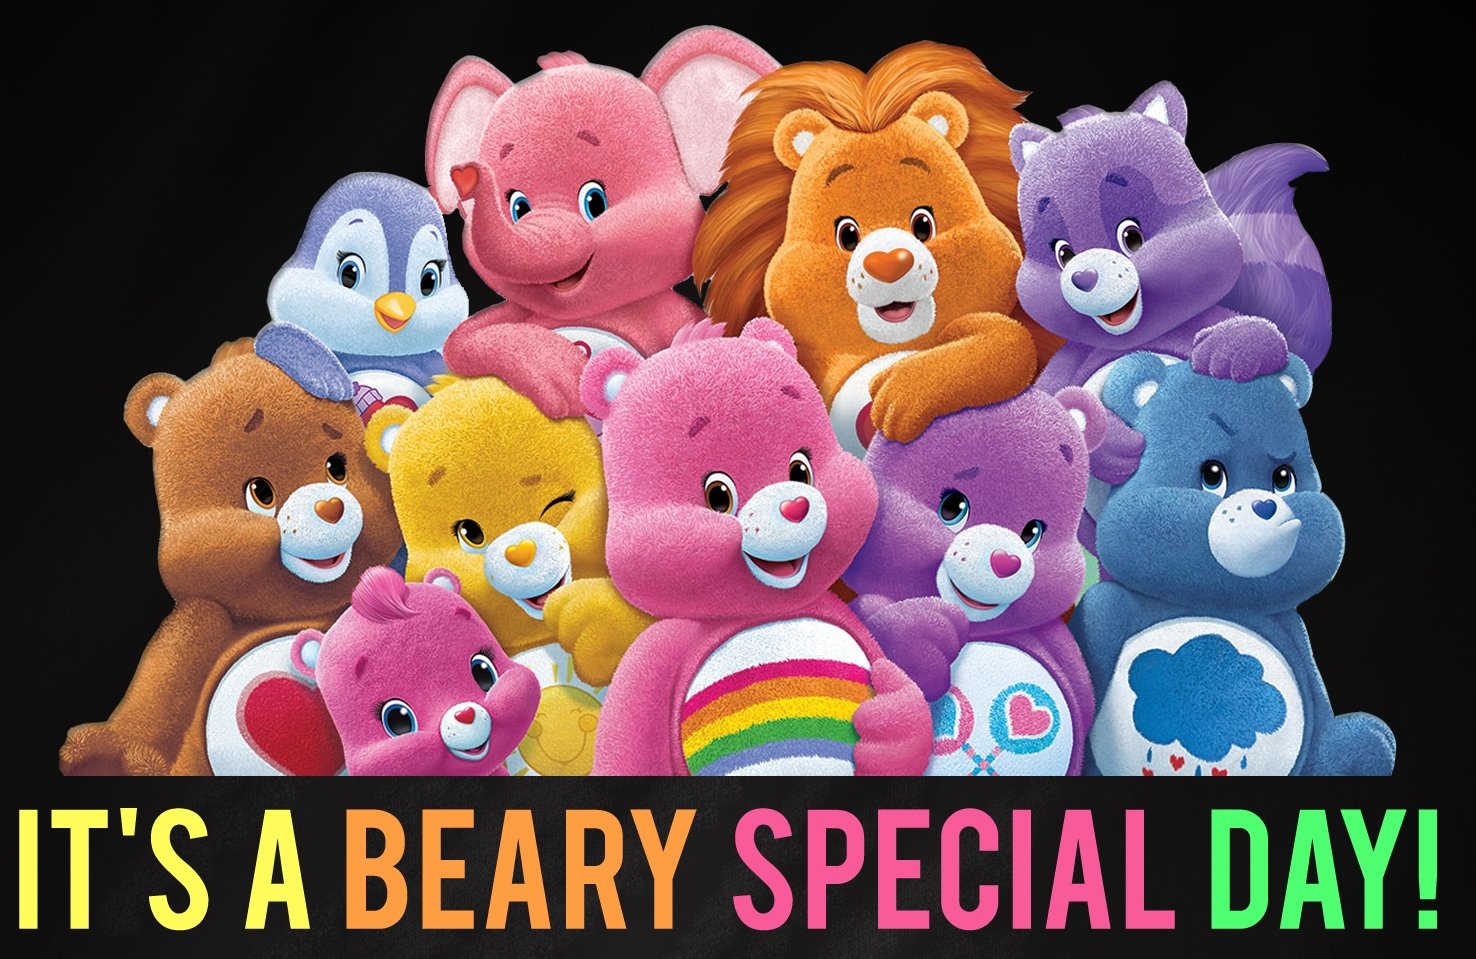 Bitty's 6th care bears themed birthday party!